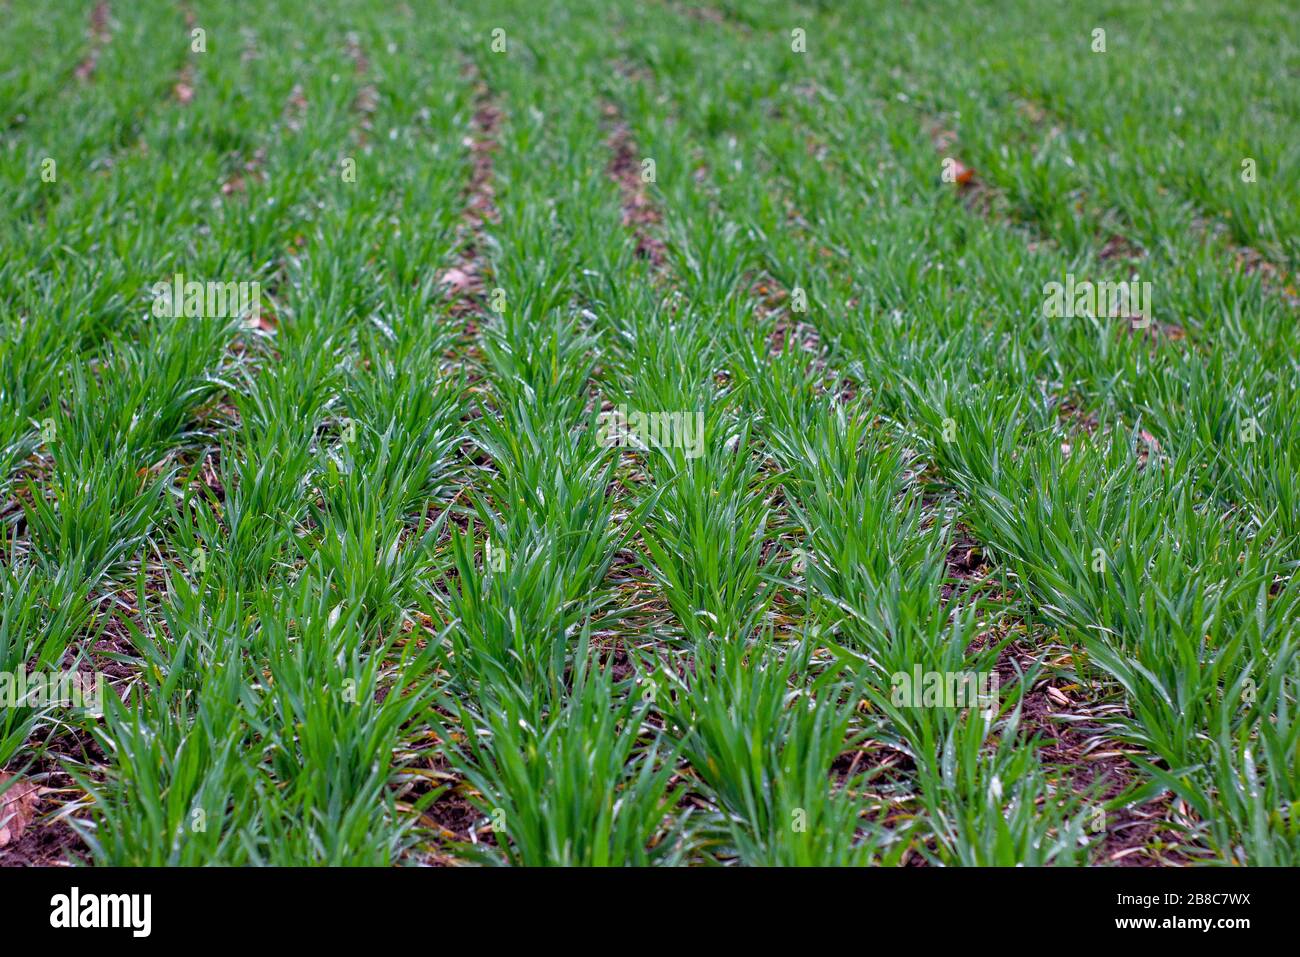 Rows of winter wheat crops with dew after rain. Cereal crops in the spring after a rainy season without disease and pests. Stock Photo